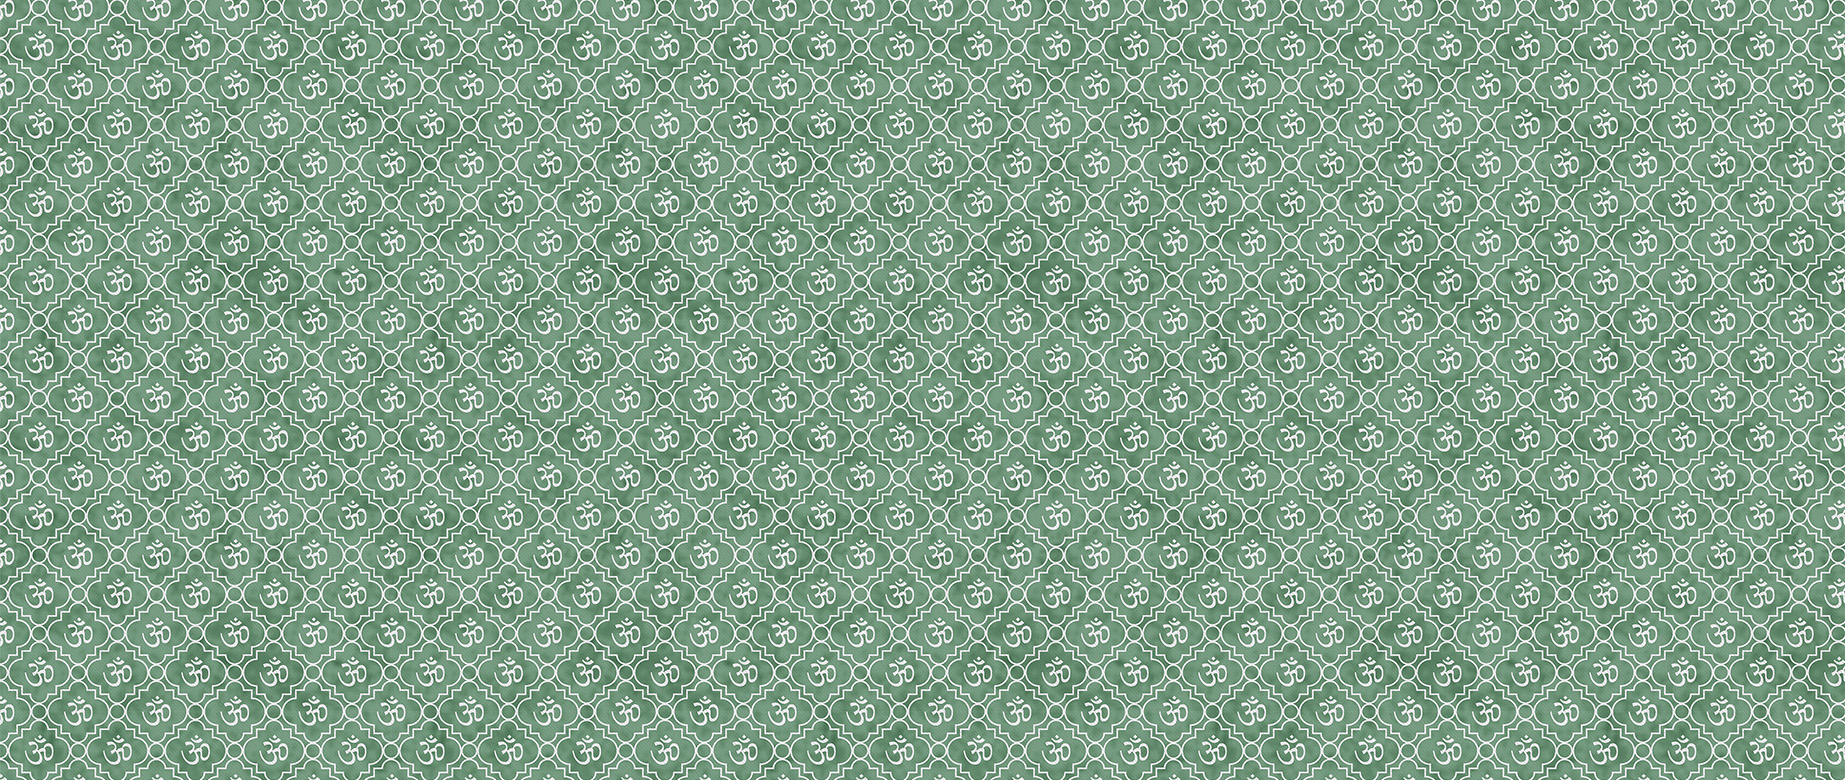 om-pattern-in-green-wallpapers-full-wide-view